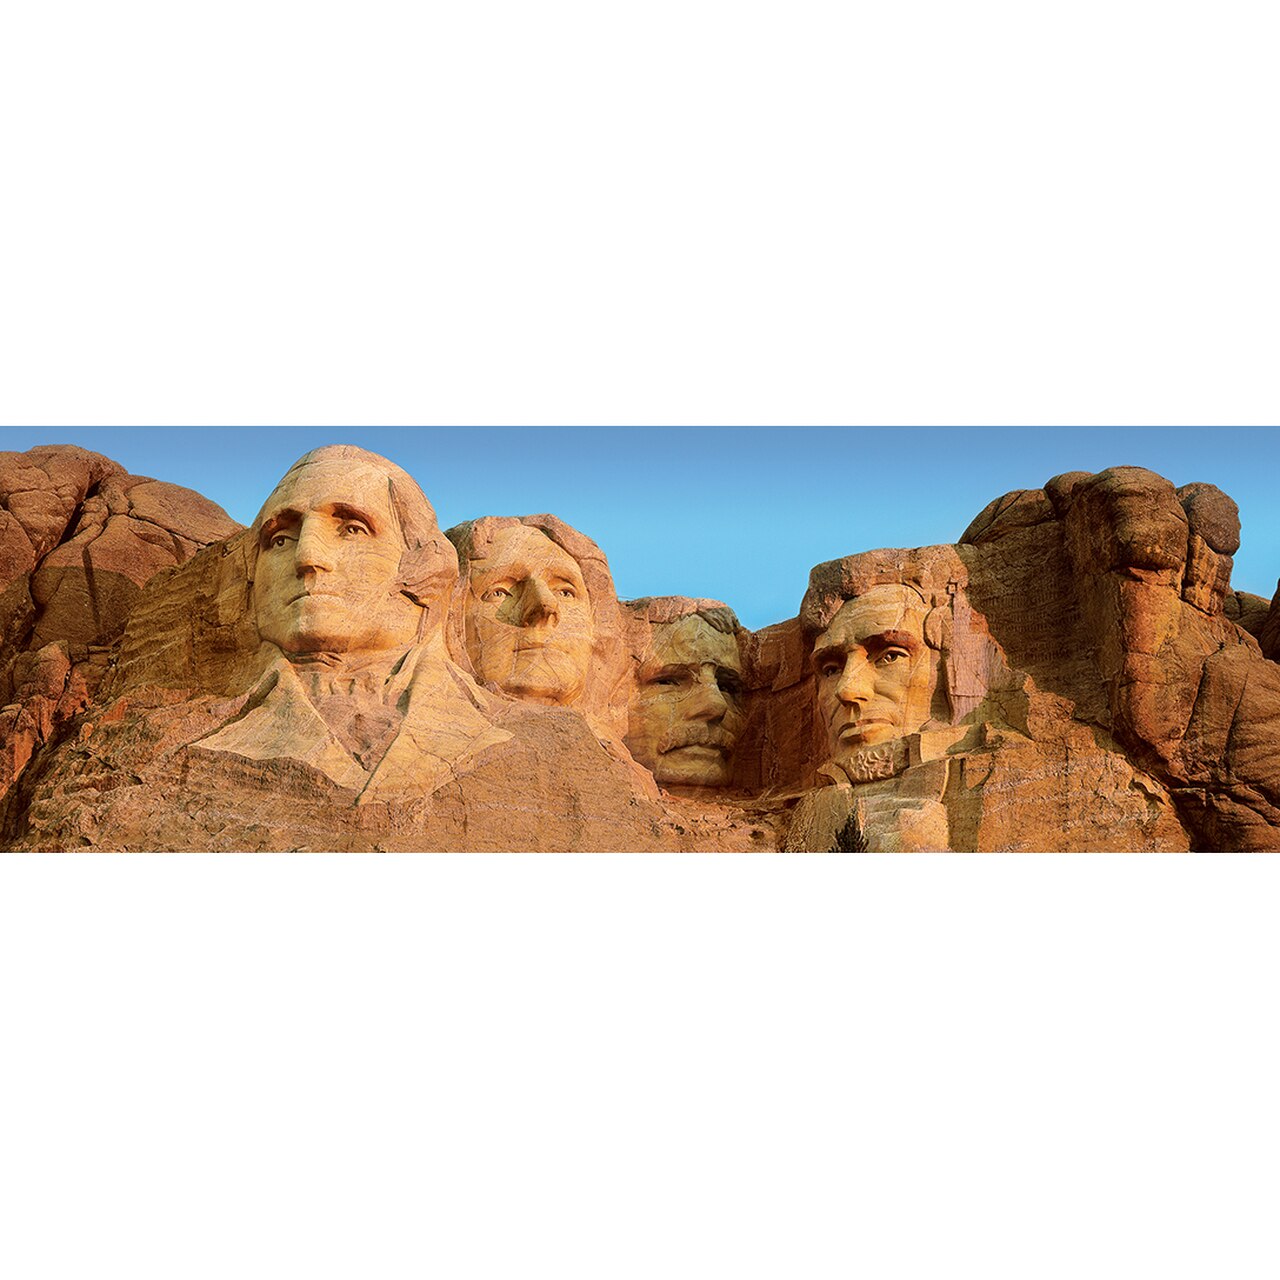 American Vista Panoramic - Mount Rushmore 1000 Piece Panoramic Jigsaw Puzzle by MasterPieces